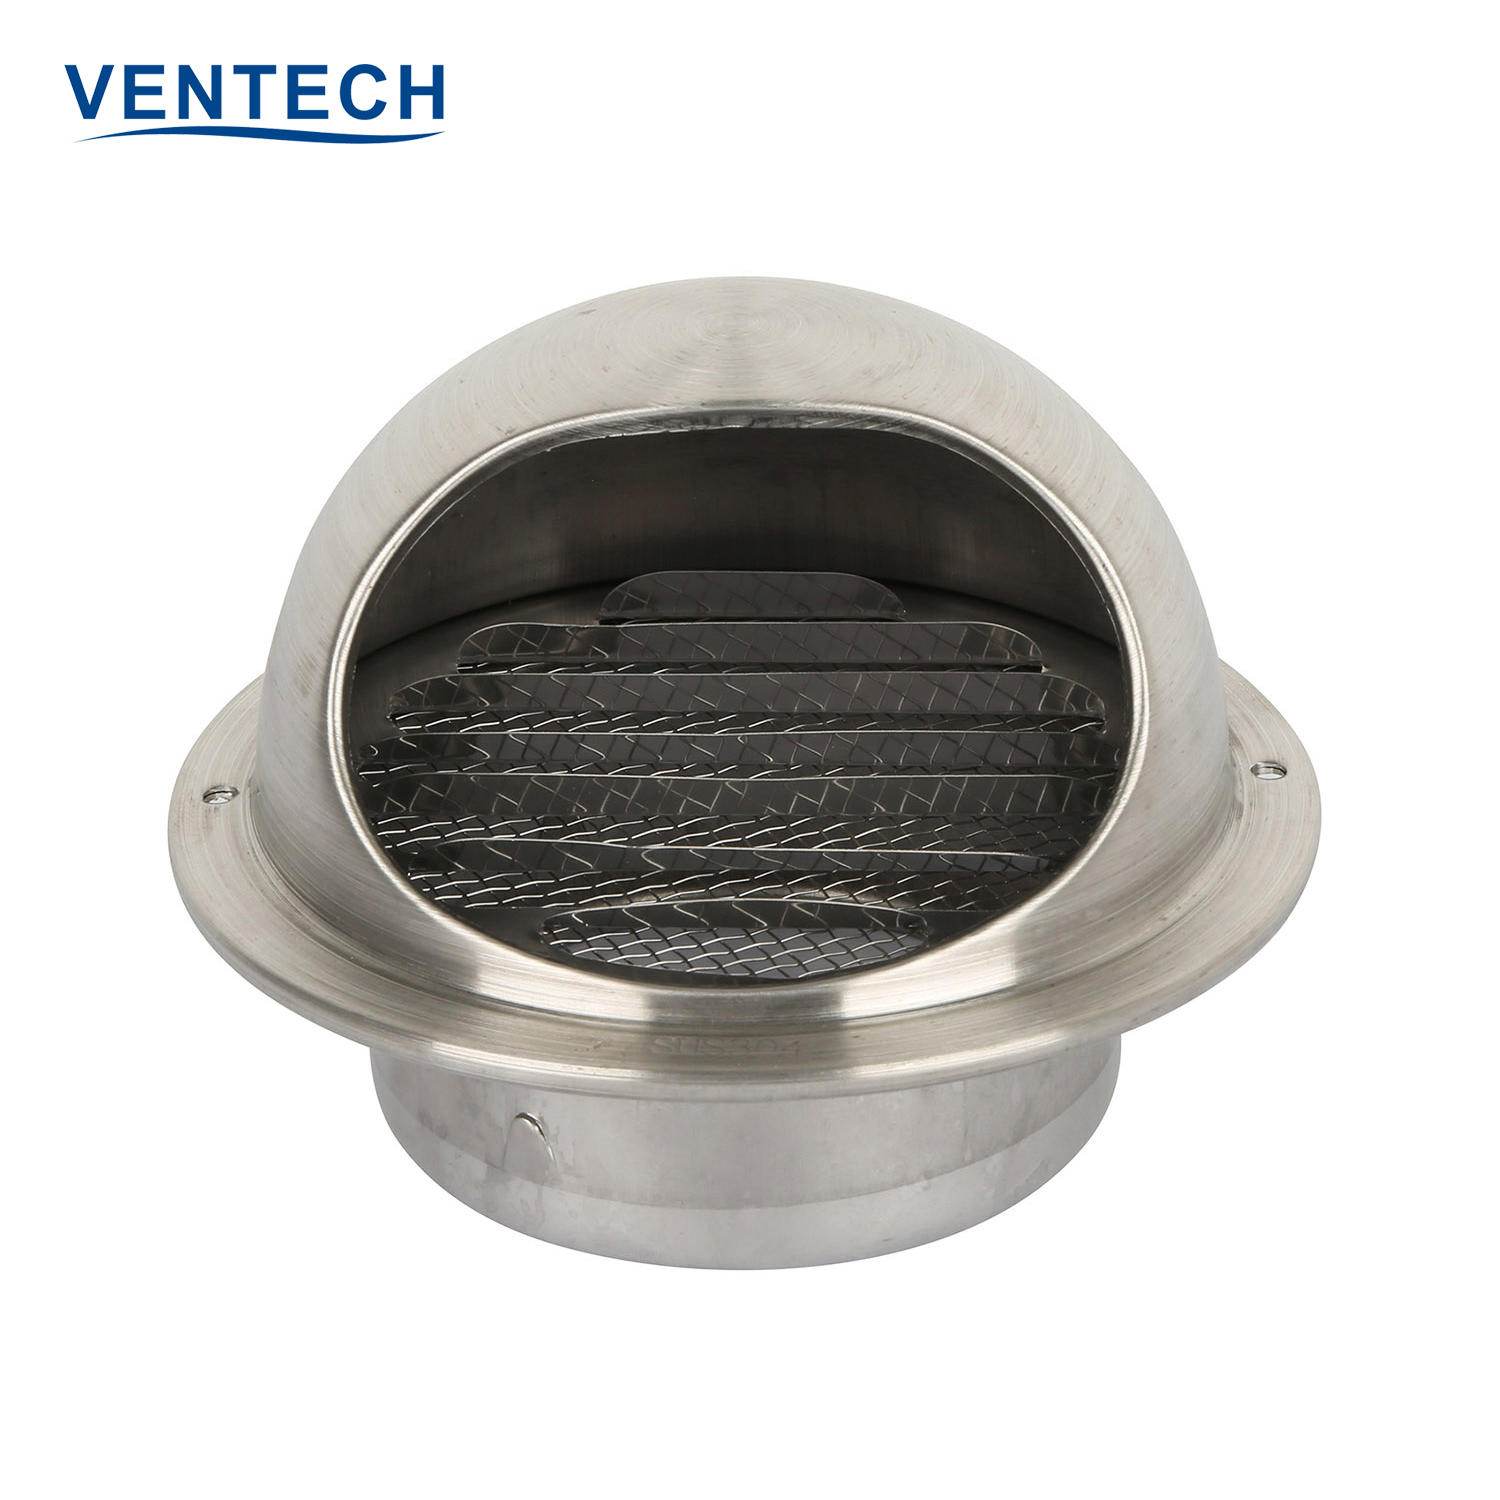 Hvac Exterior Wall 304 Stainless Steel Waterproof Exhaust Air Vent Cap Ball Weather Louver